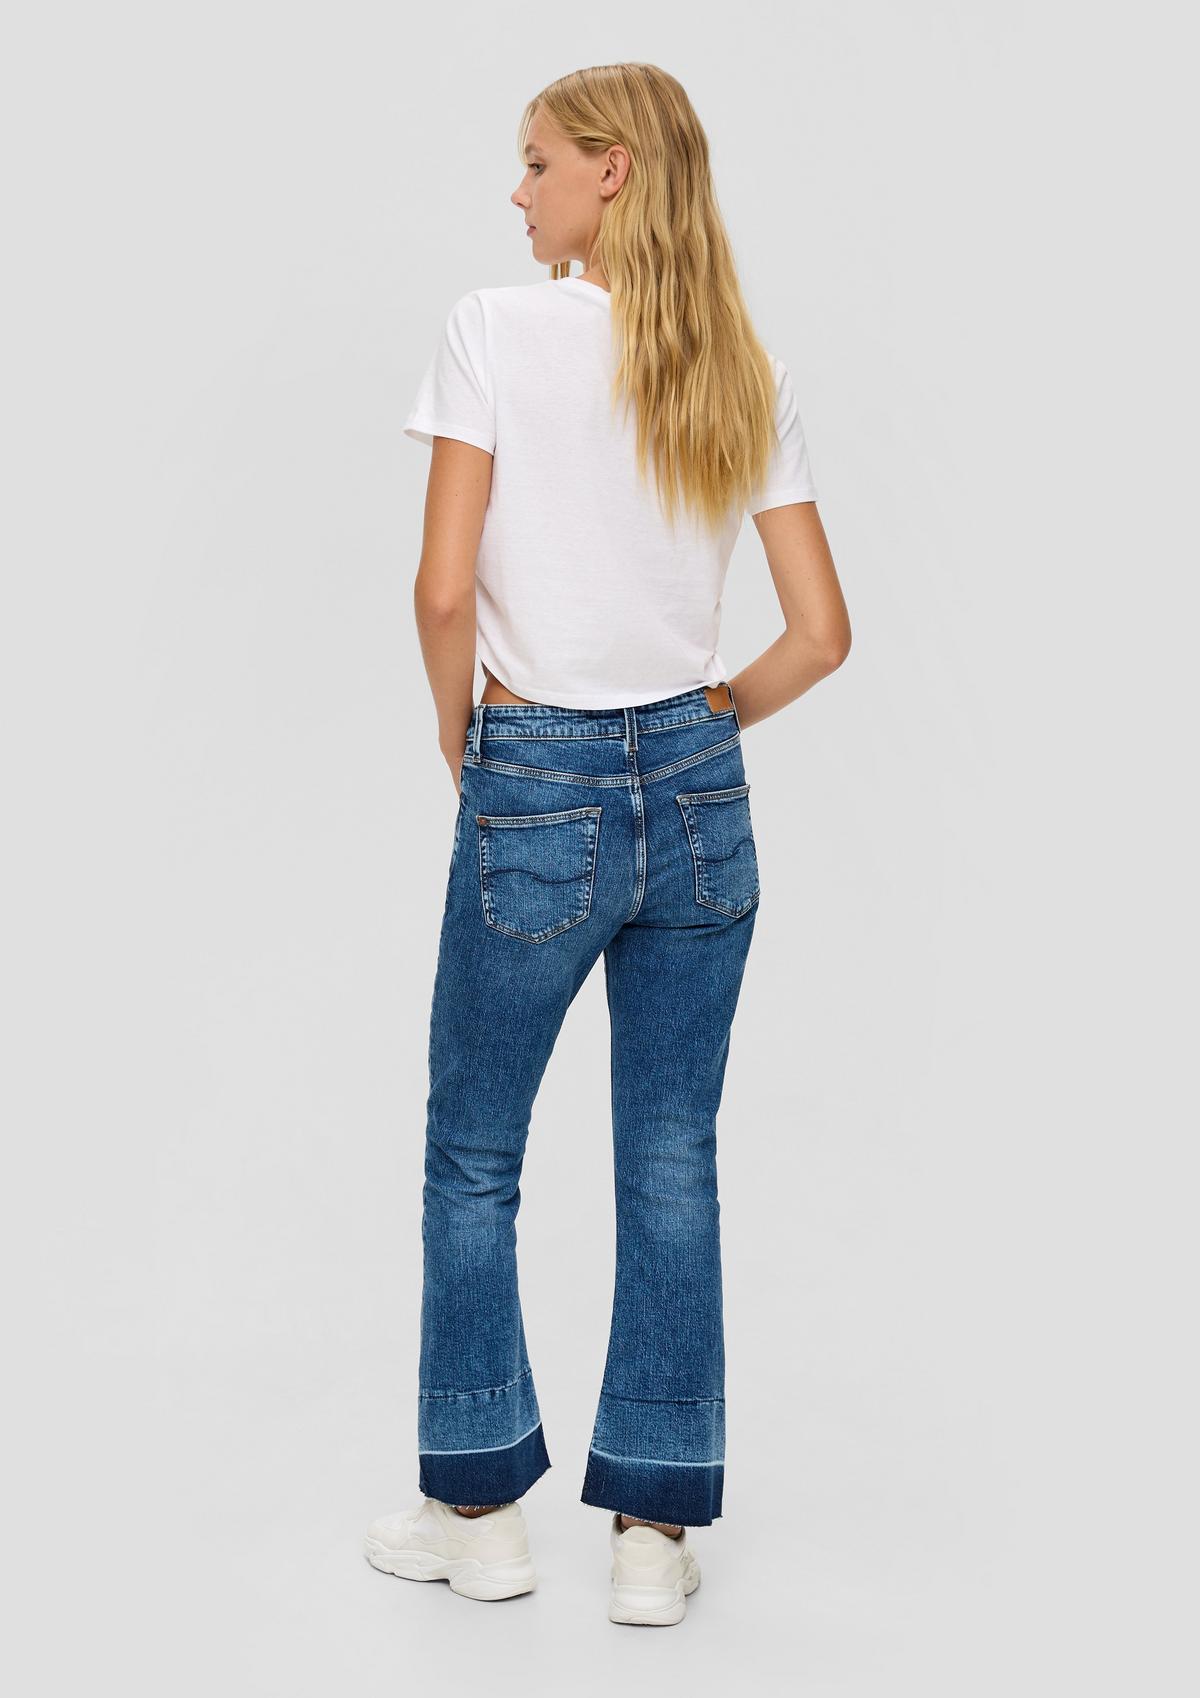 s.Oliver Cropped jeans Reena / slim fit / high rise / flared leg